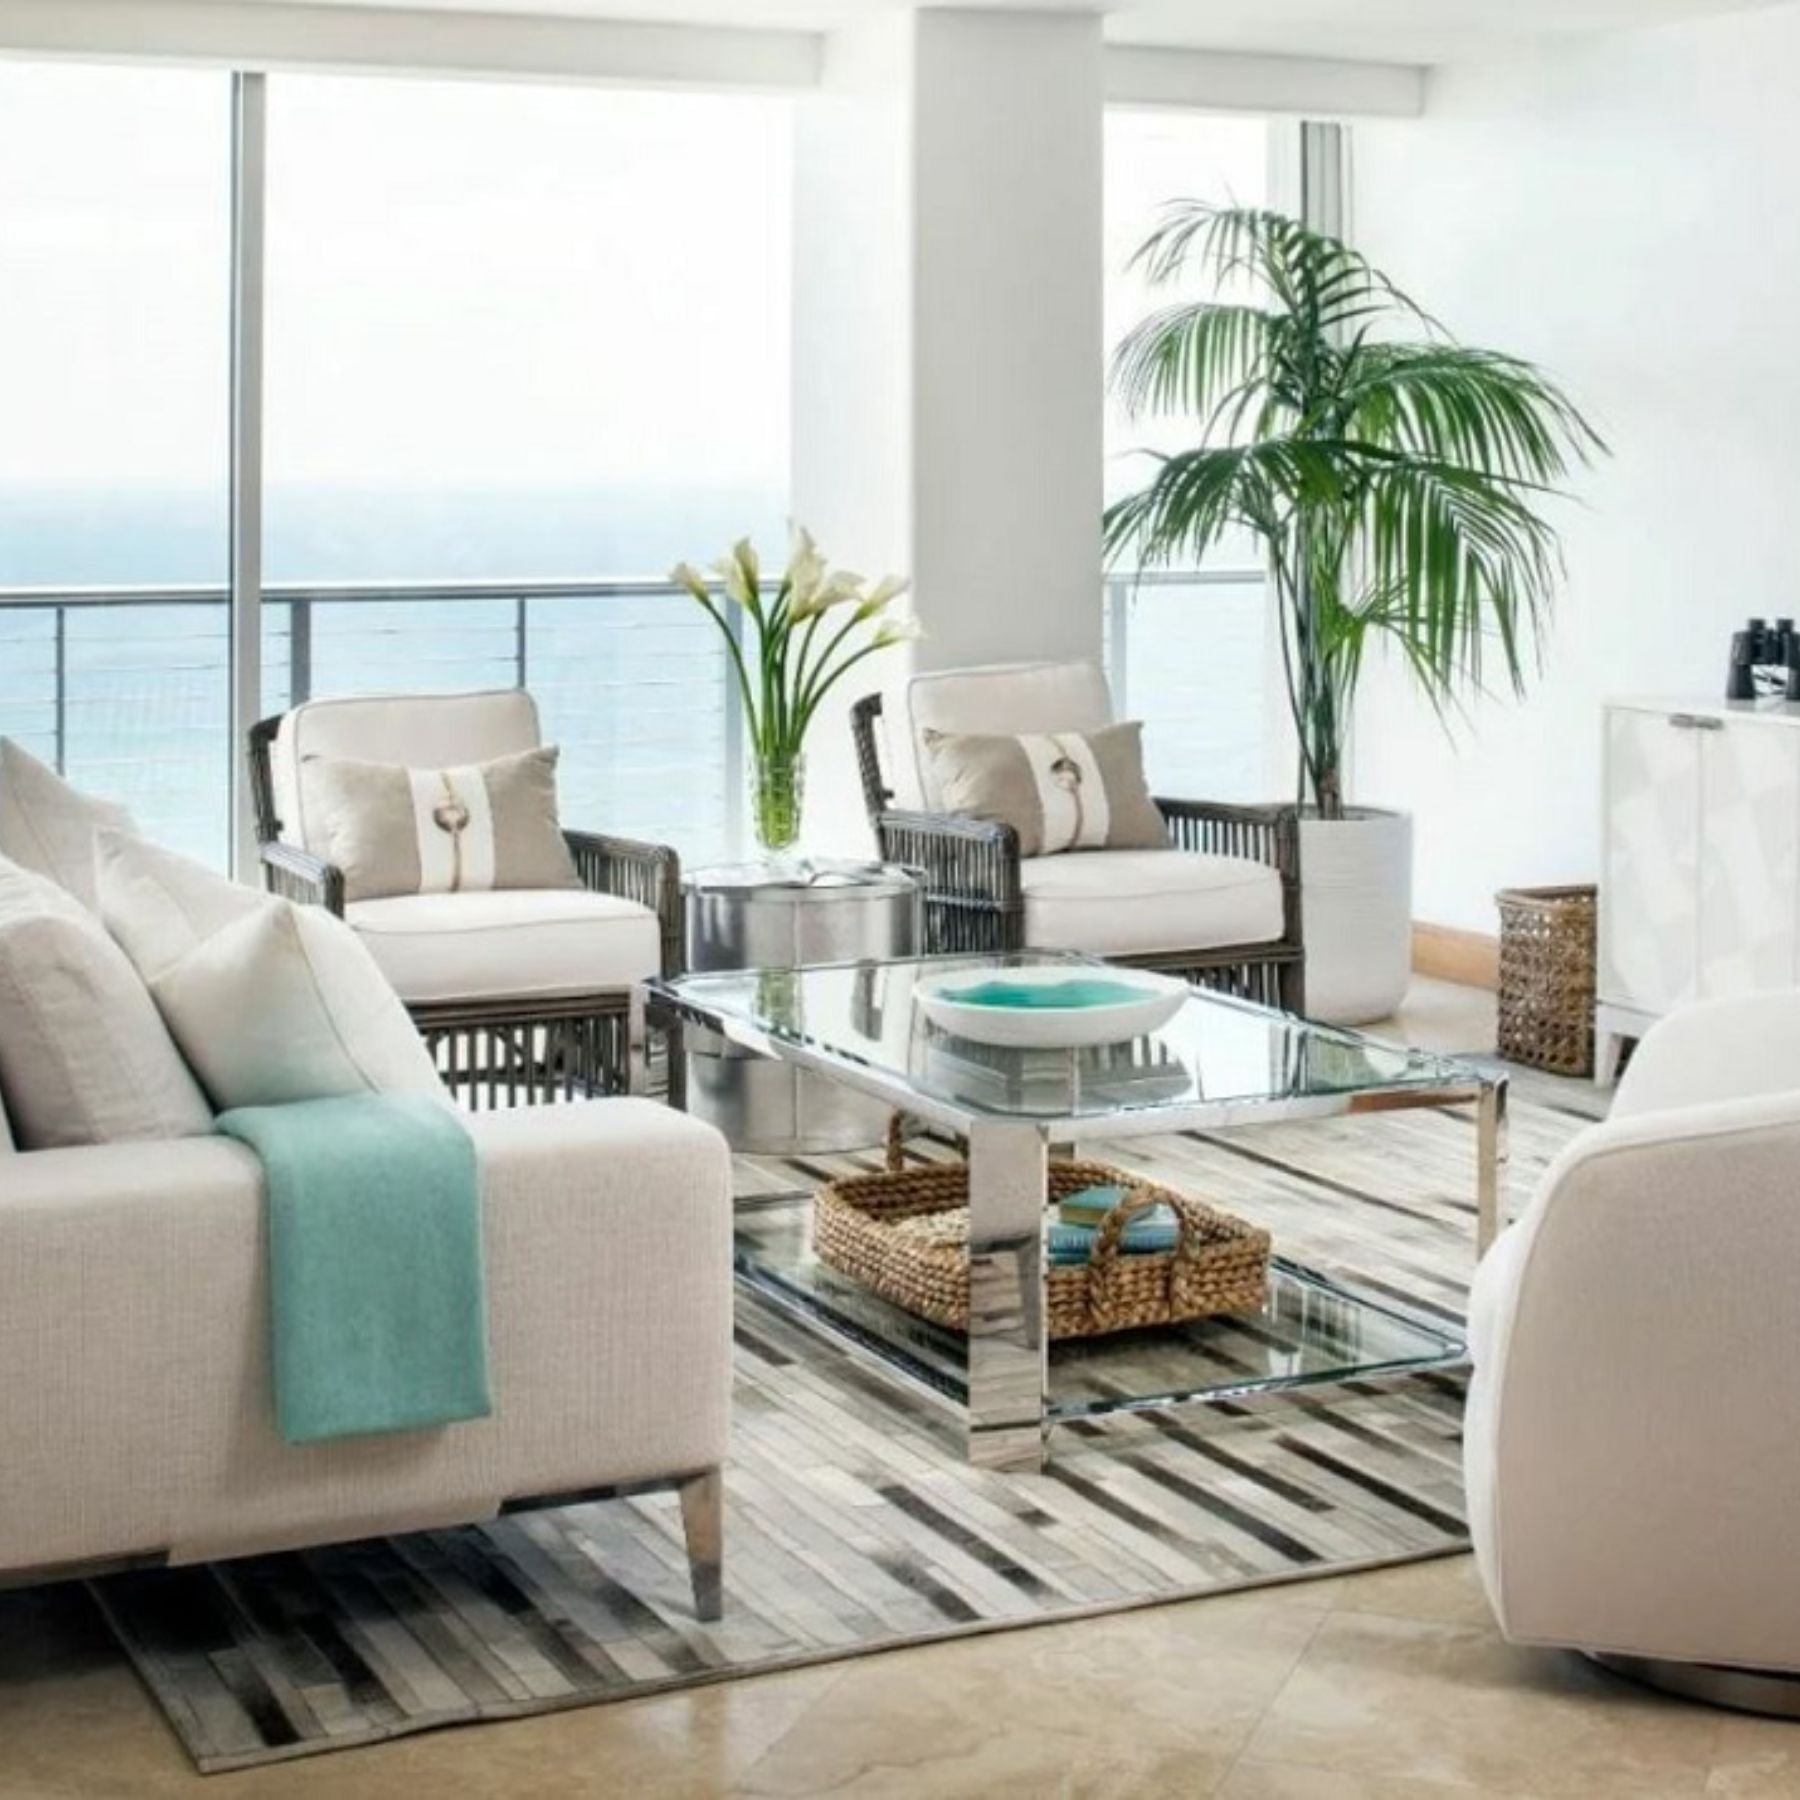 this is the third most popular interior design style in the united states